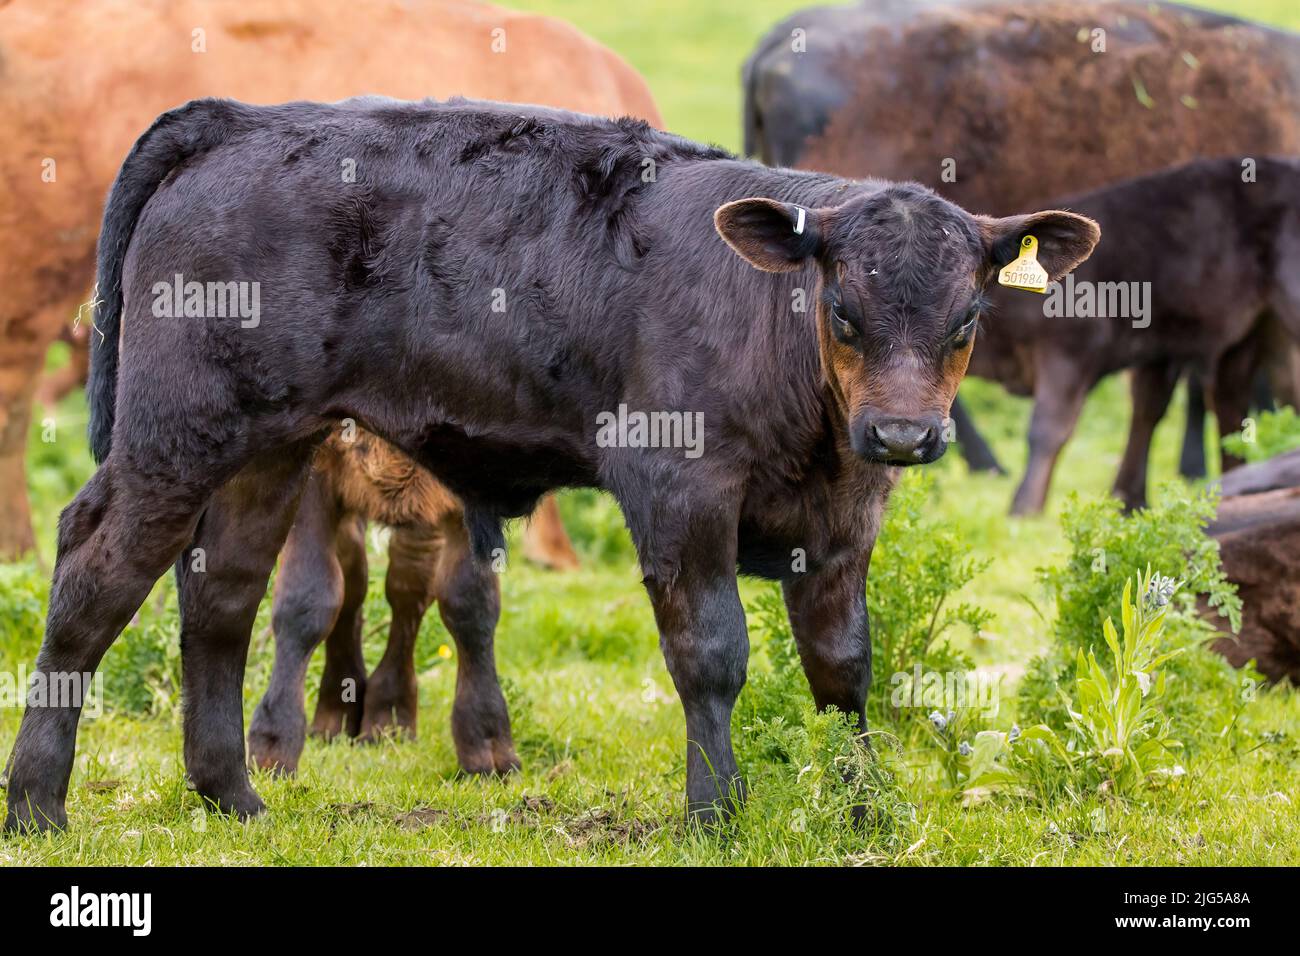 Young beef calf black and tan muzzle with yellow ear tag and metal ear clip, looks like a male, close up shot with background cattle and grass Stock Photo